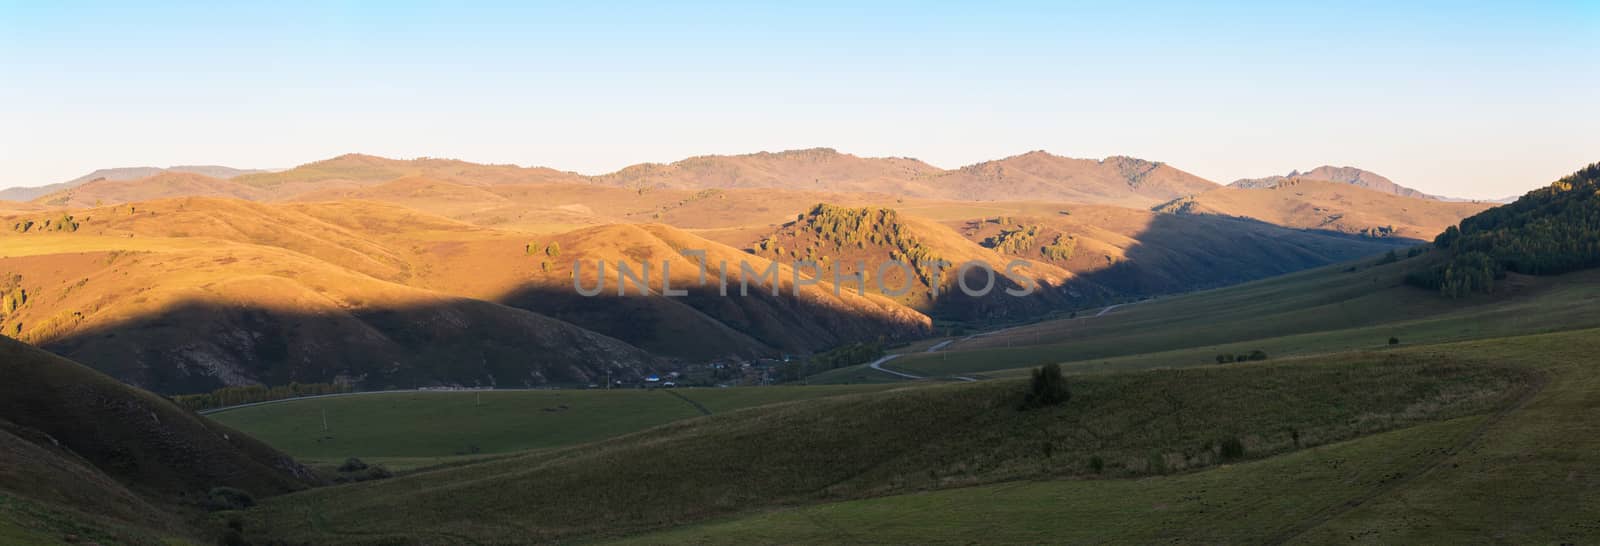 Village landscape panorama in the evening by rusak